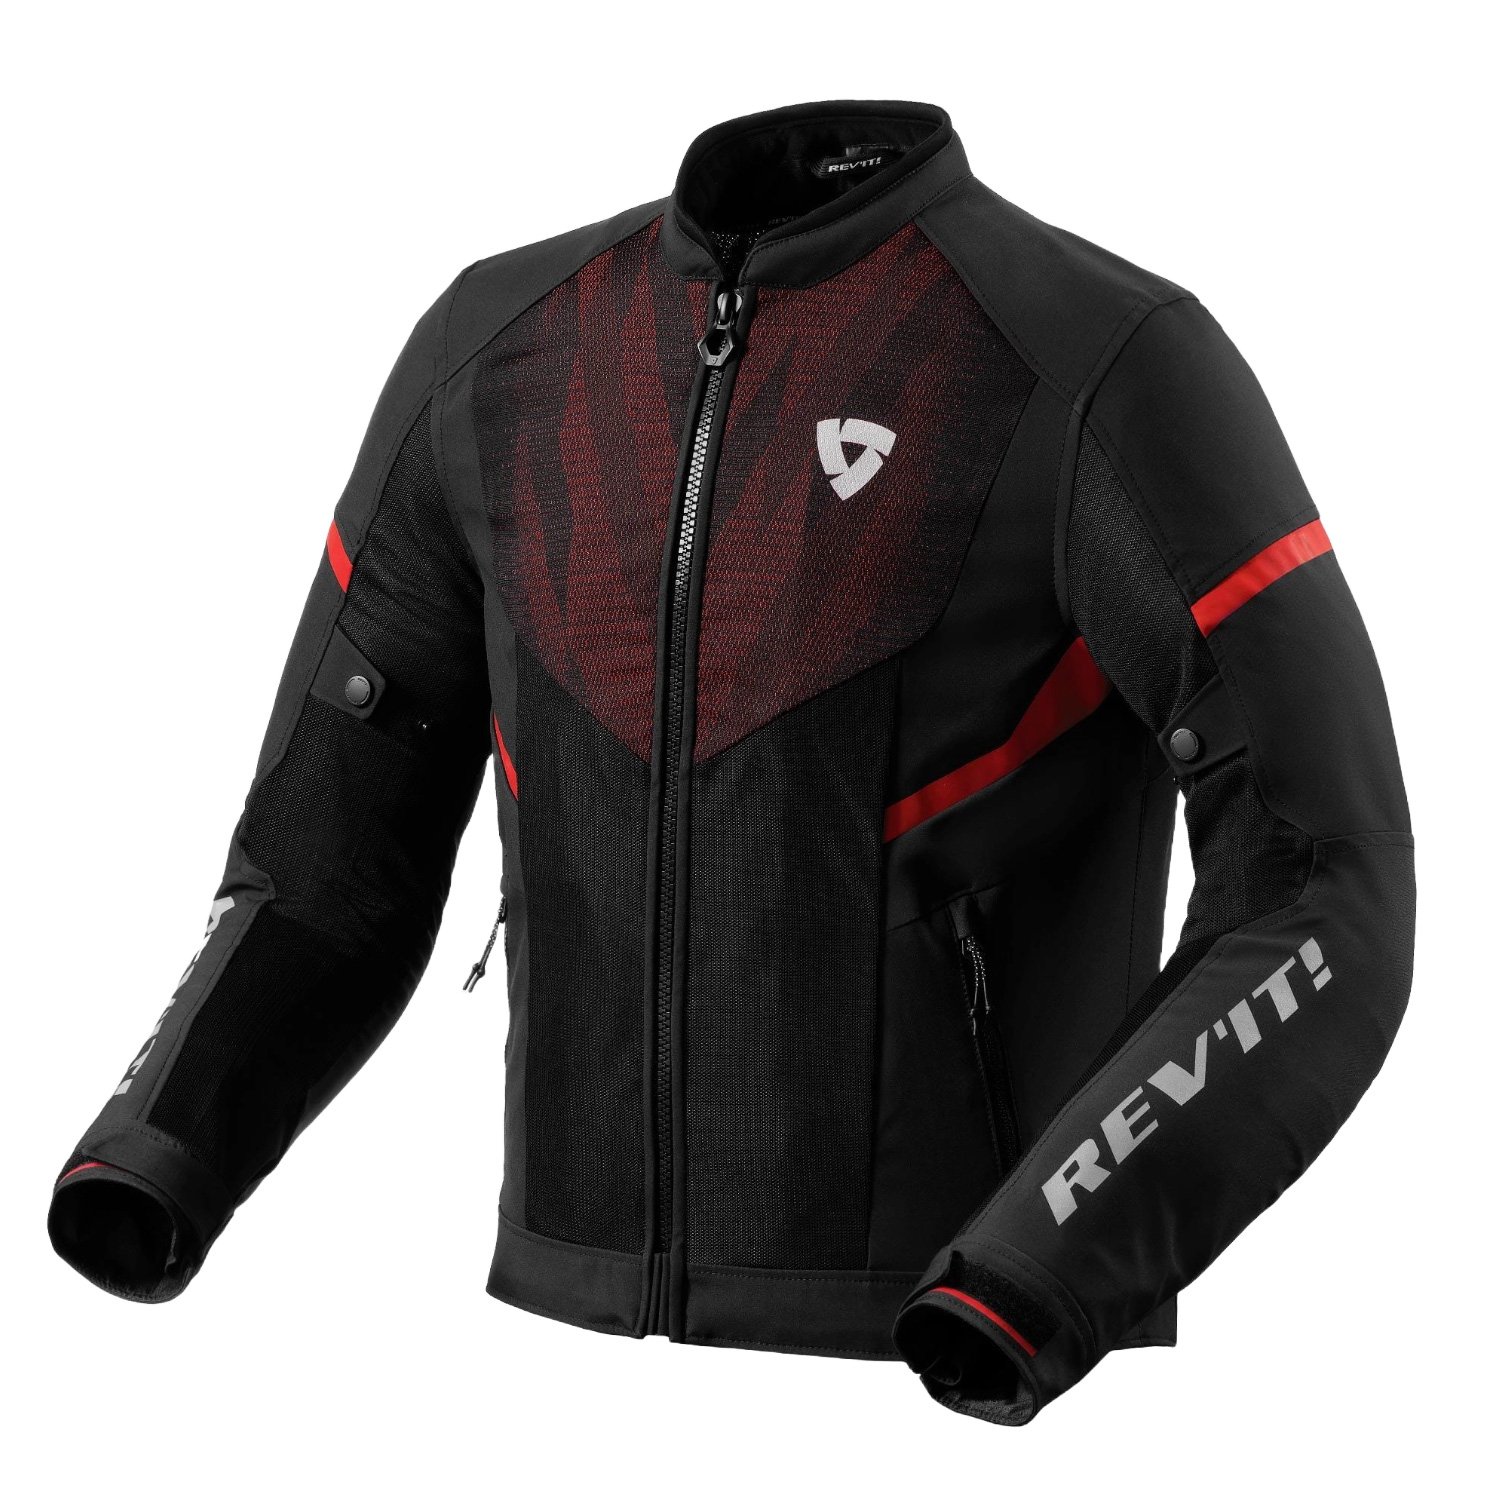 Image of REV'IT! Hyperspeed 2 GT Air Jacket Black Neon Red Size L ID 8700001367486